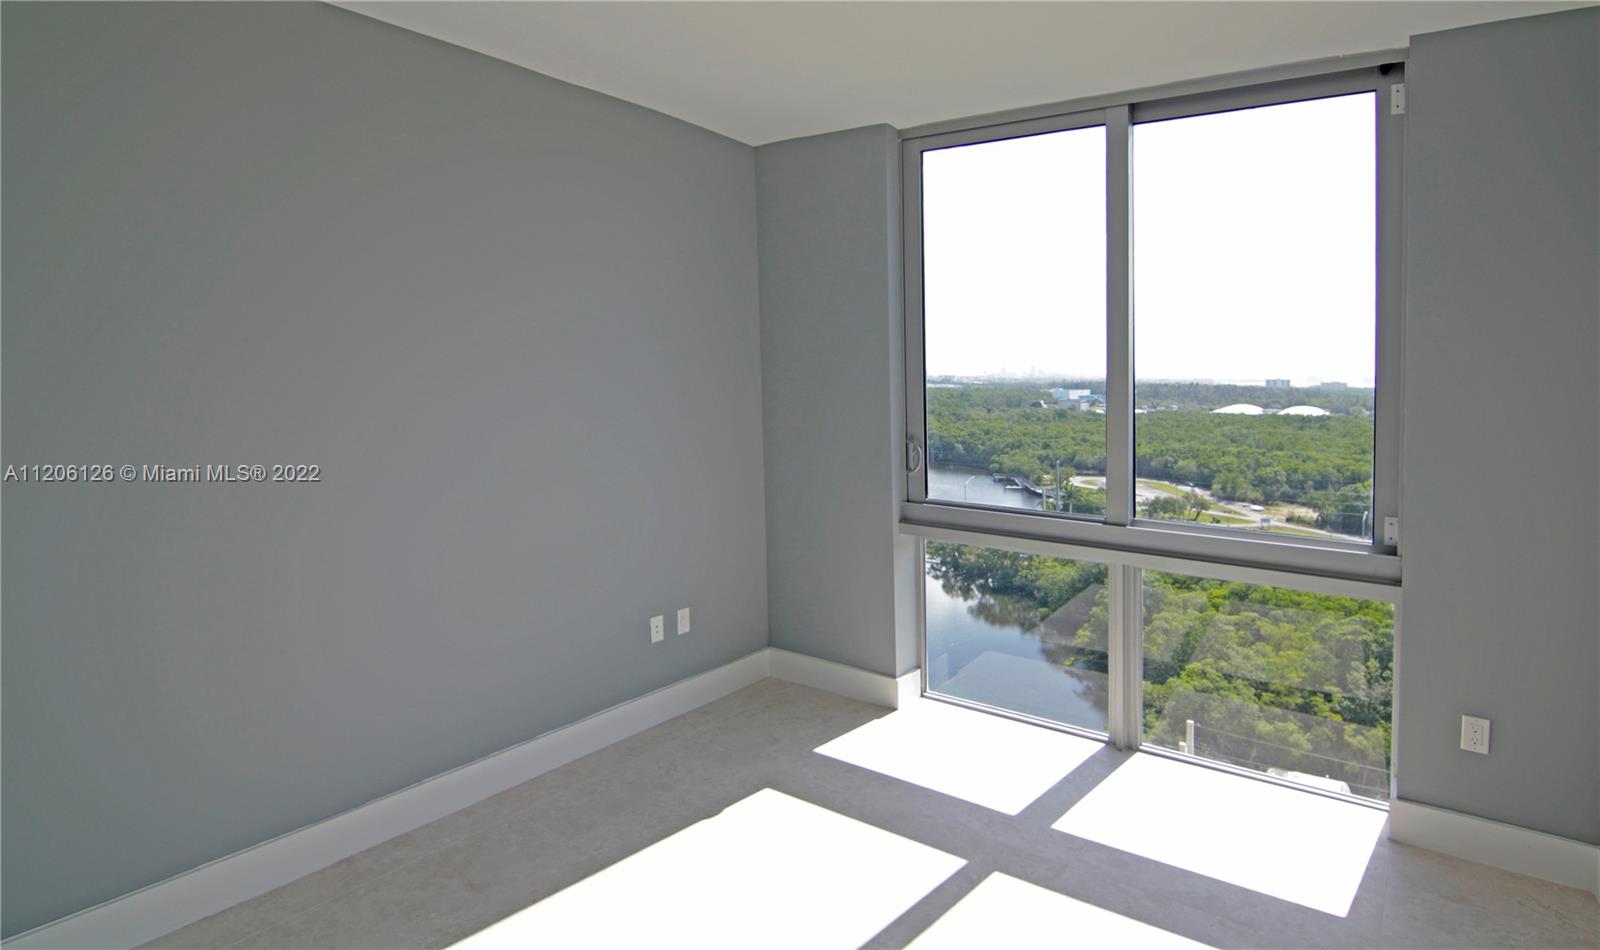 This is the #3rd Bedrooms Facing South , lot natural light and amazing views